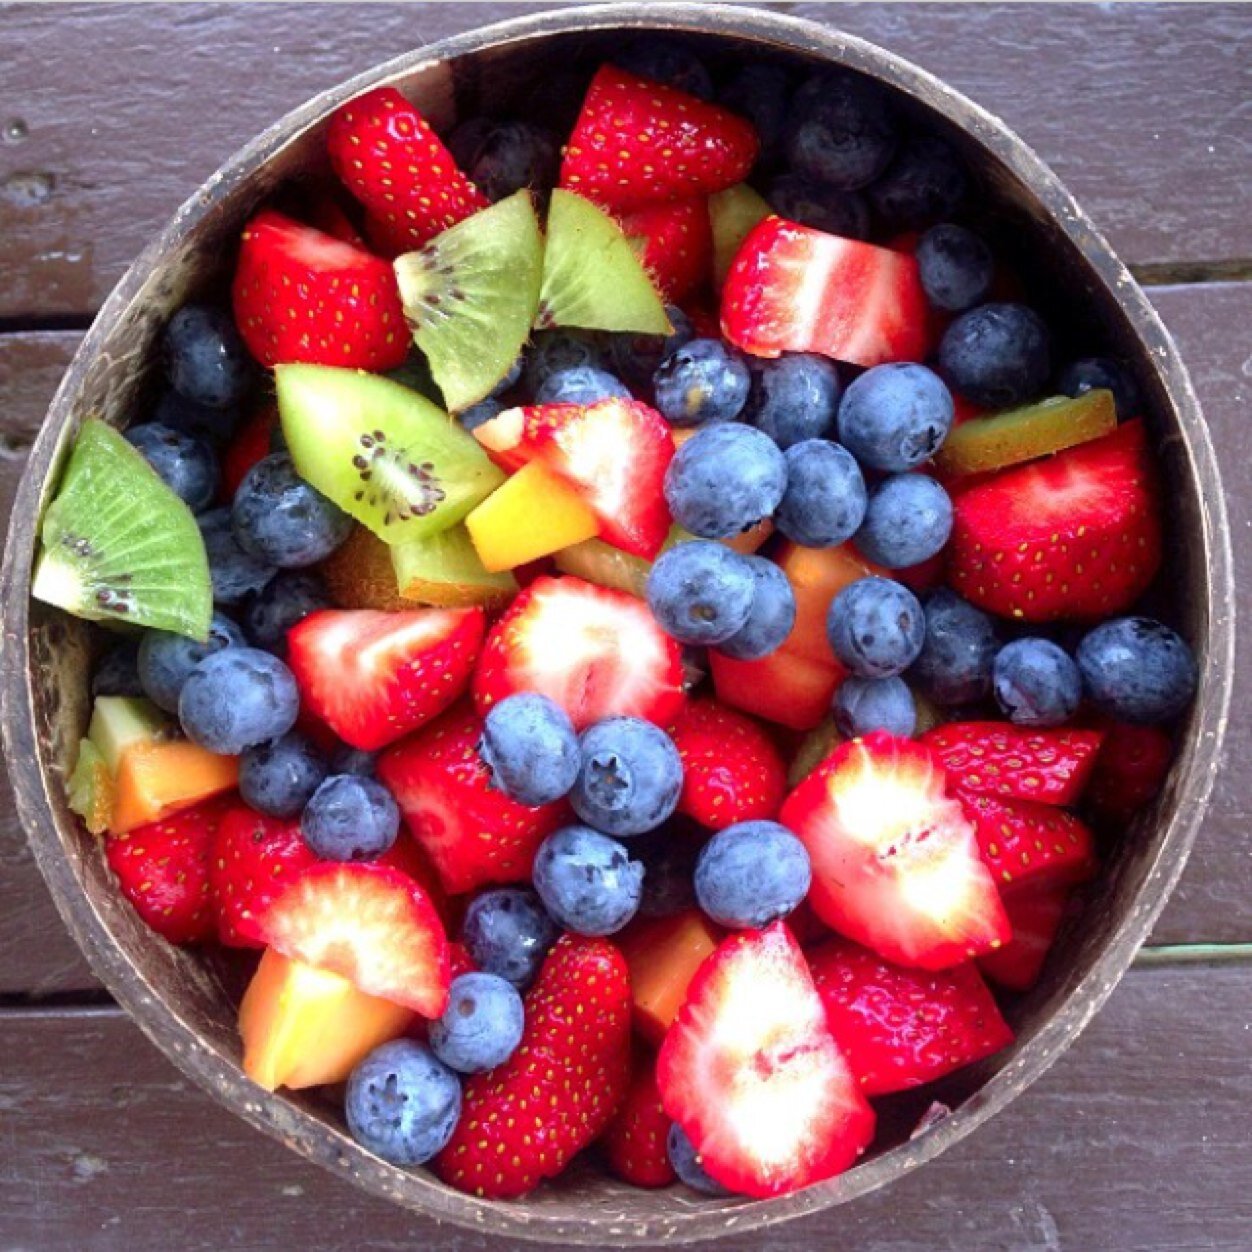 Healthy Food @BeFitFoods | Twitter